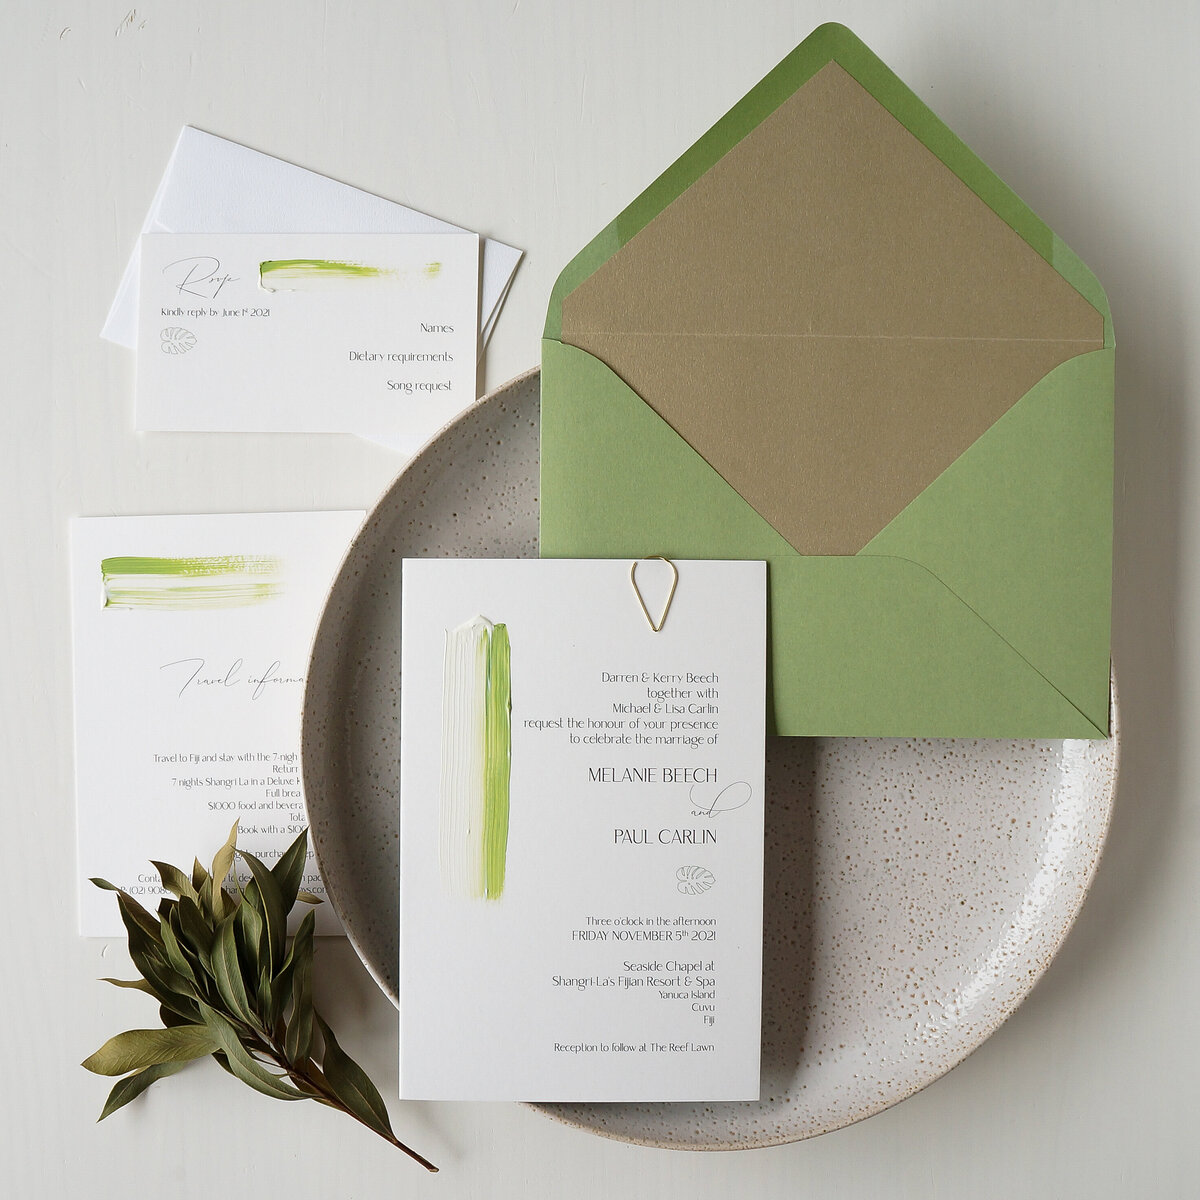 Tropical wedding invitation suite with green and white painting and green and gold envelope